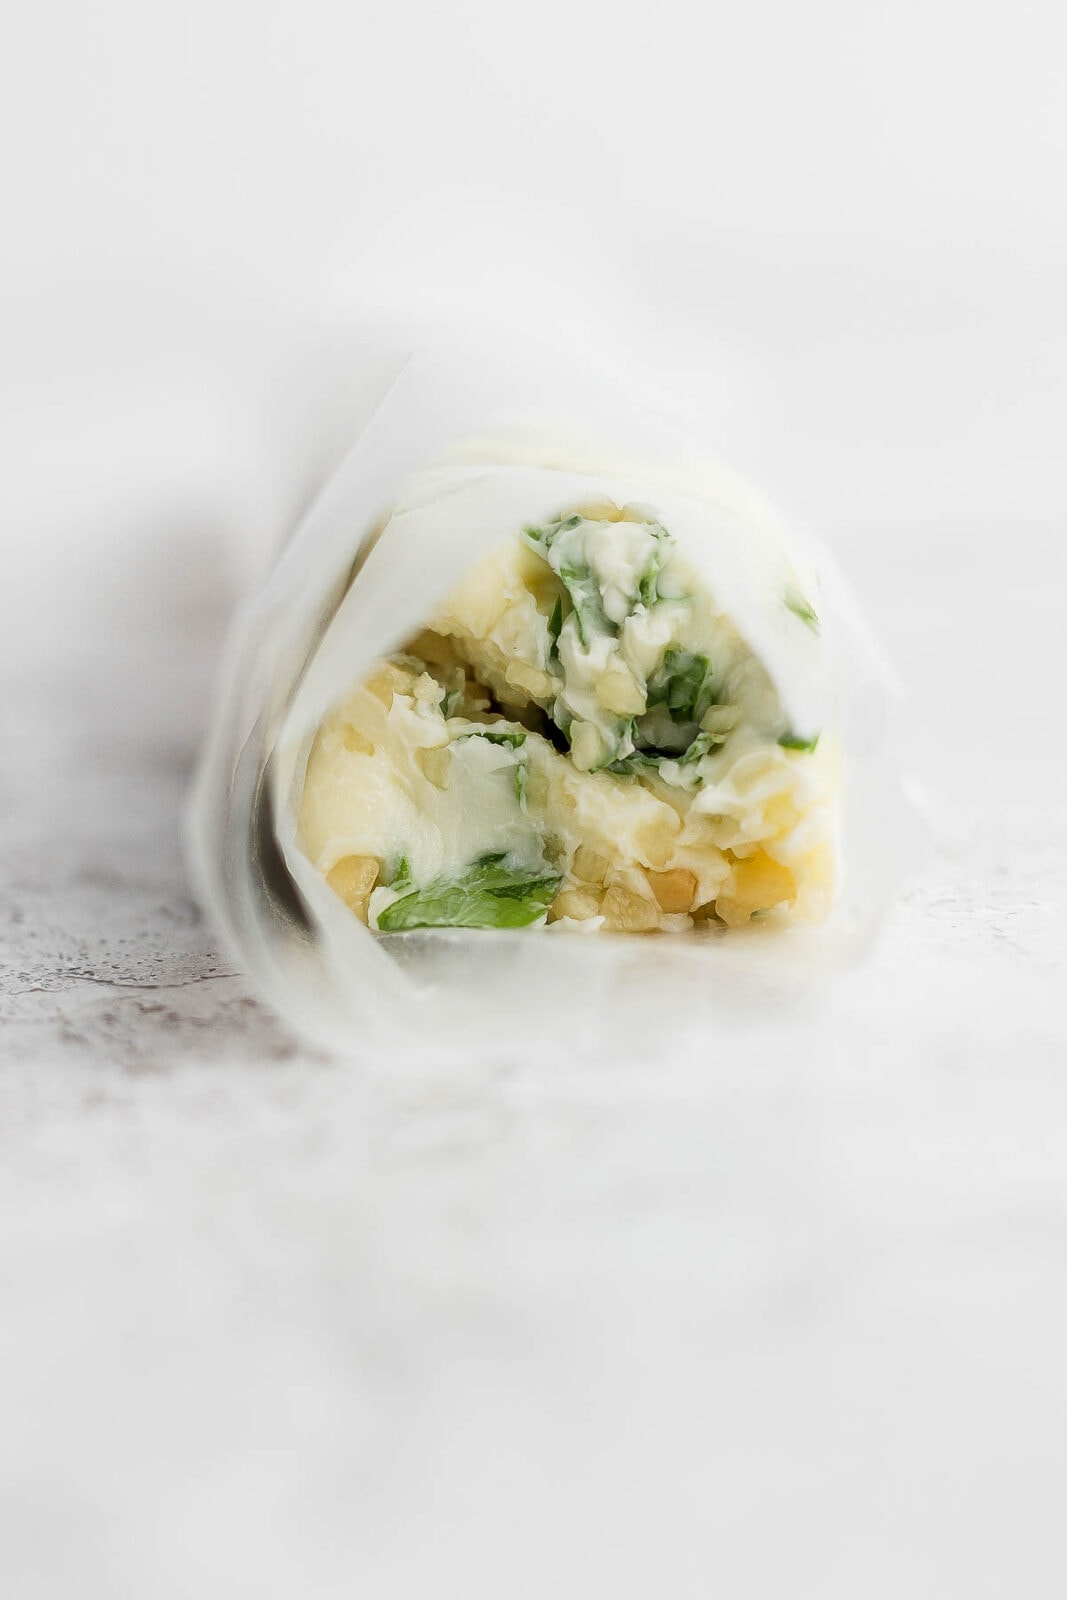 Herbed butter rolled in wax paper.